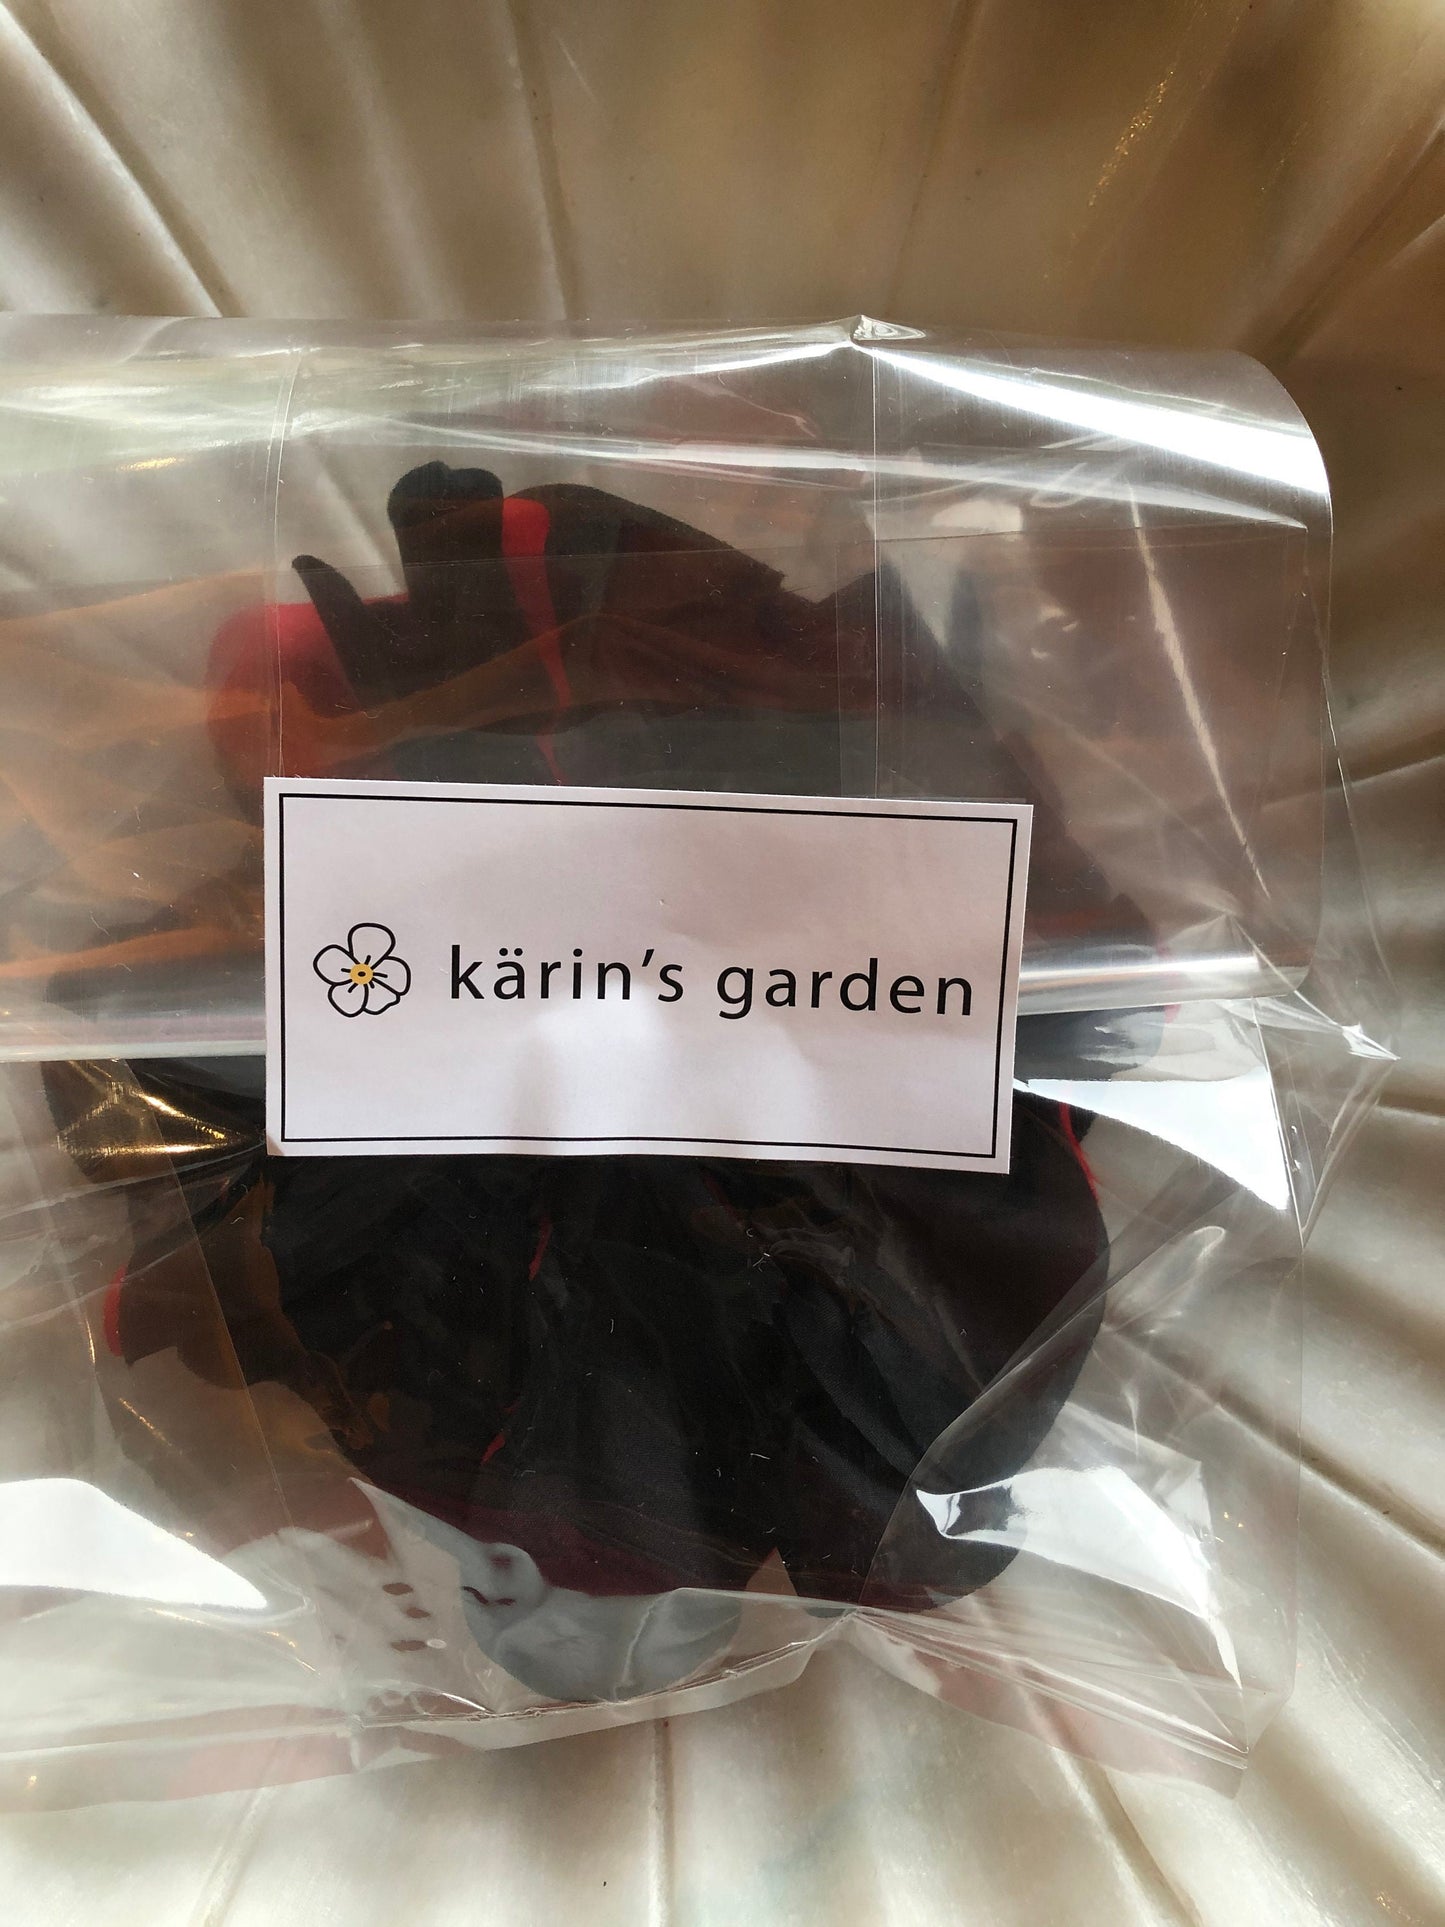 Karin's Garden Red/Black 4.5" Silk Poppy Pin or Clip for Hair.  Flower Pin. Brooch.  Hair Accessory. Moulin Rouge.  Derby